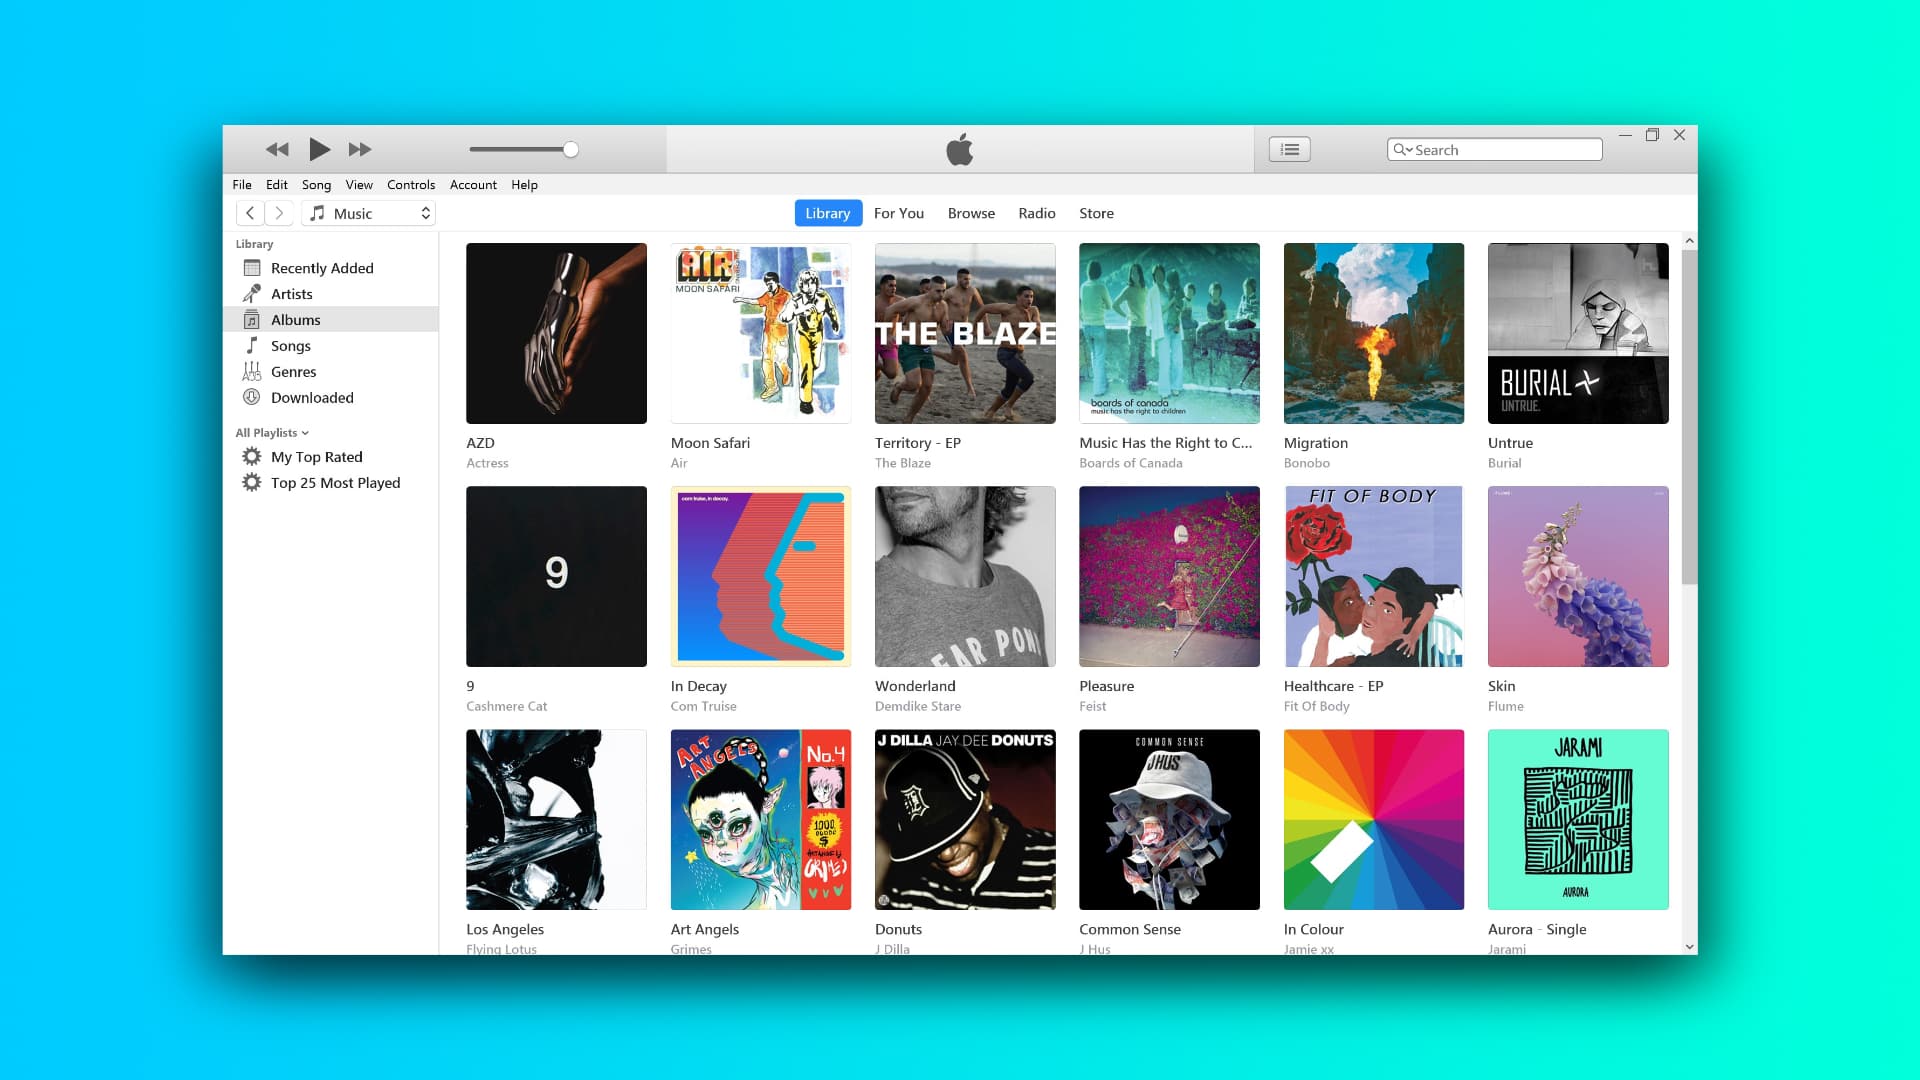 Showcasing music albums in iTunes for Windows